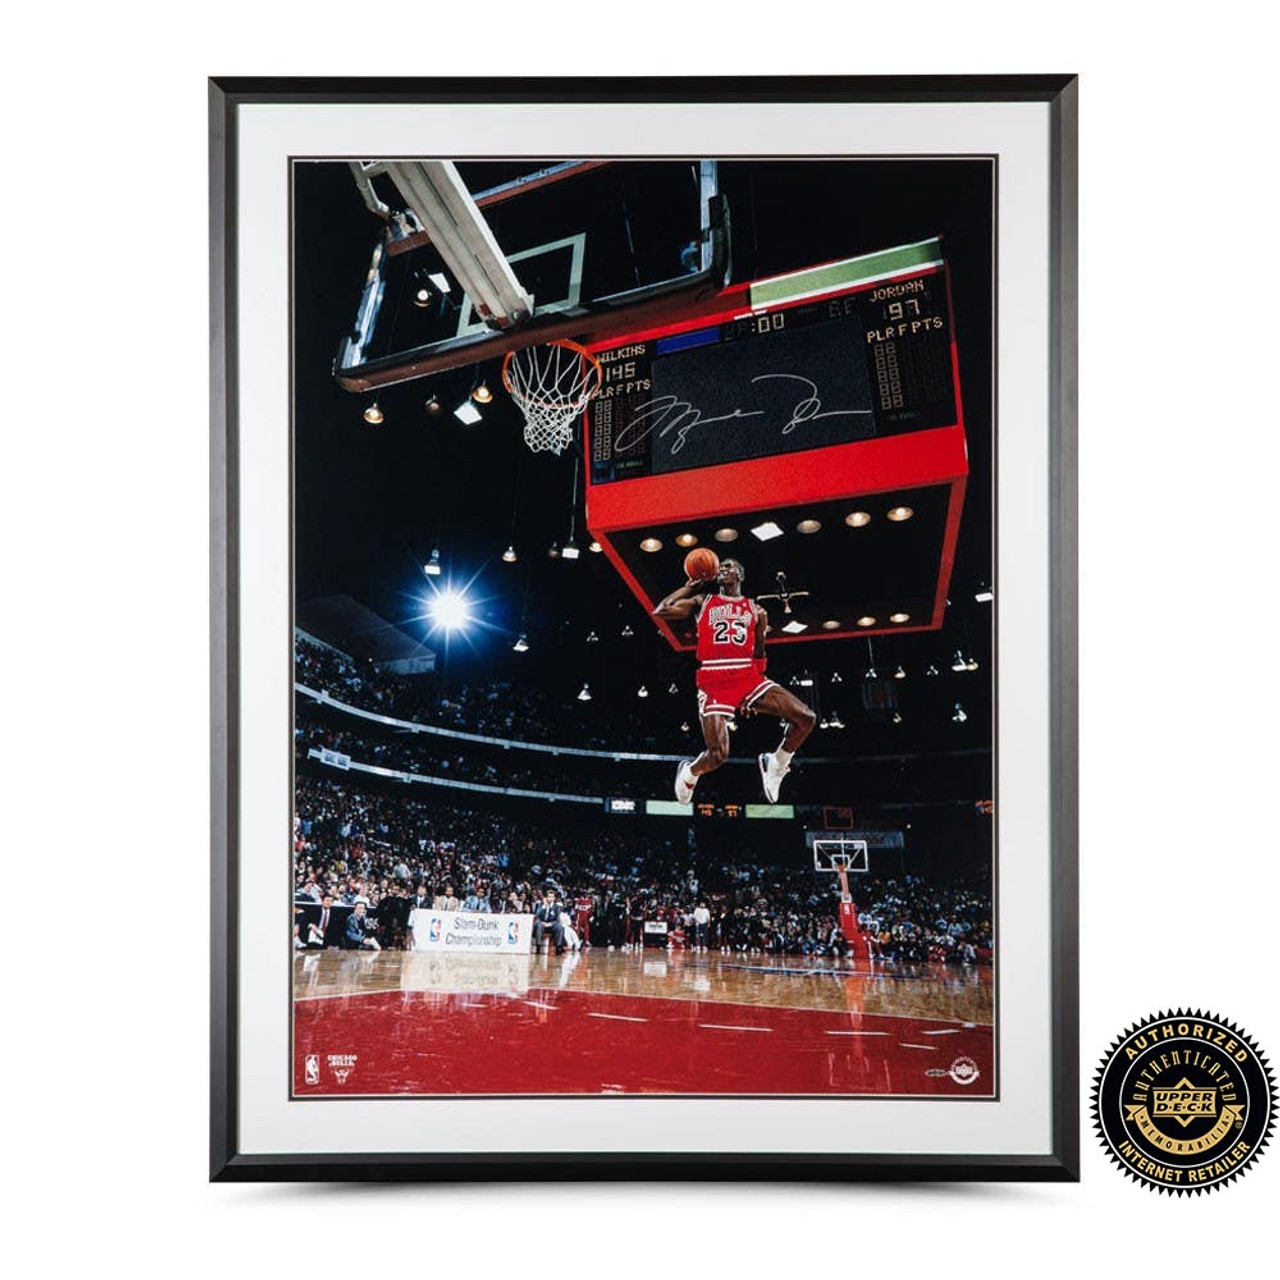 Framed Dominique Wilkins Atlanta Hawks Autographed Mitchell & Ness